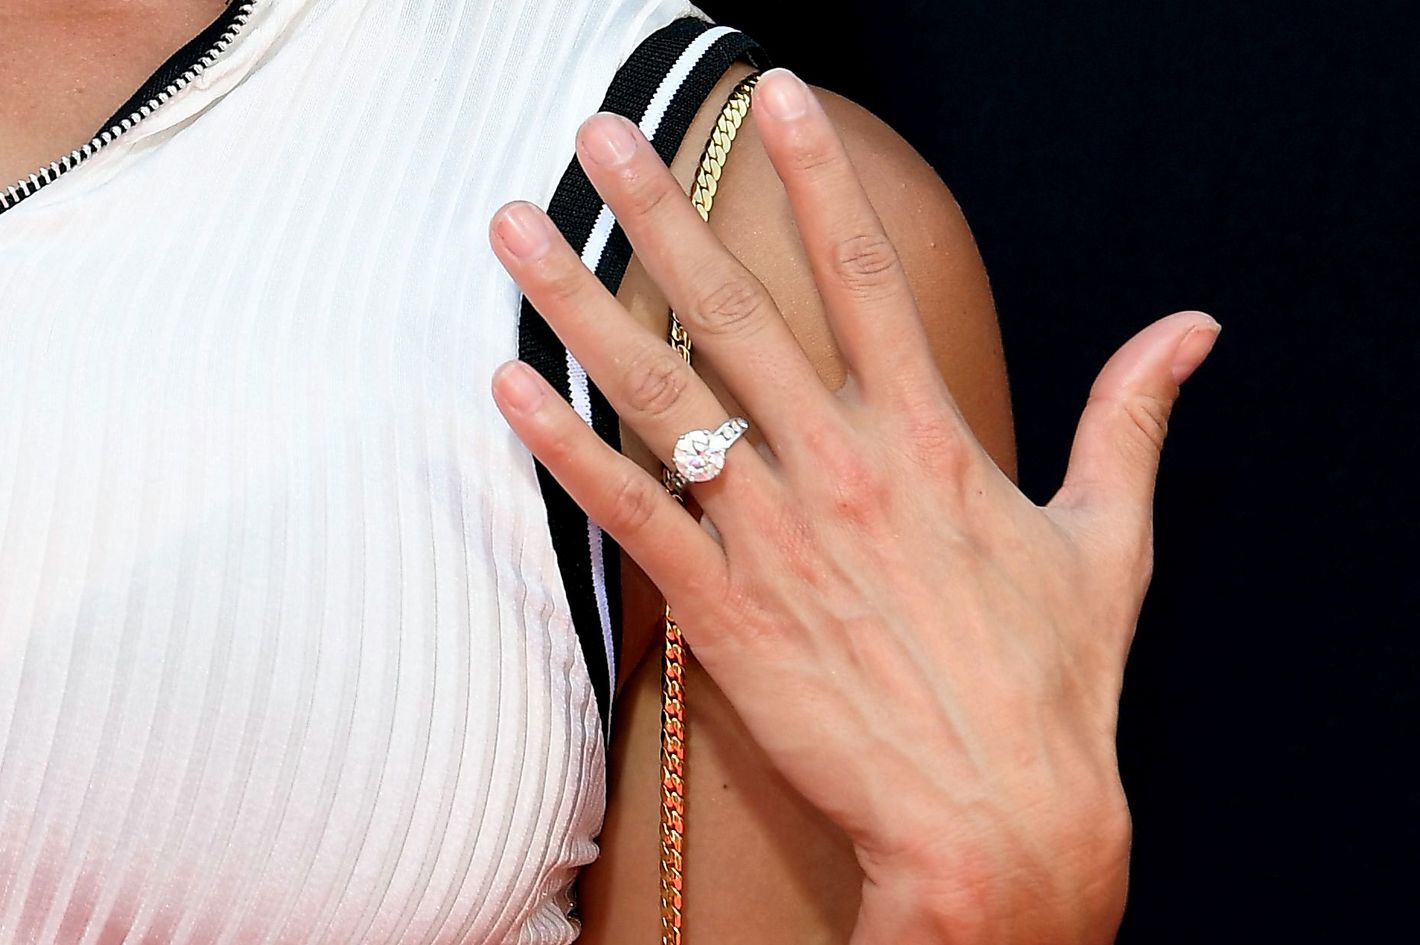 How much is Nikki Bella's engagement ring worth?